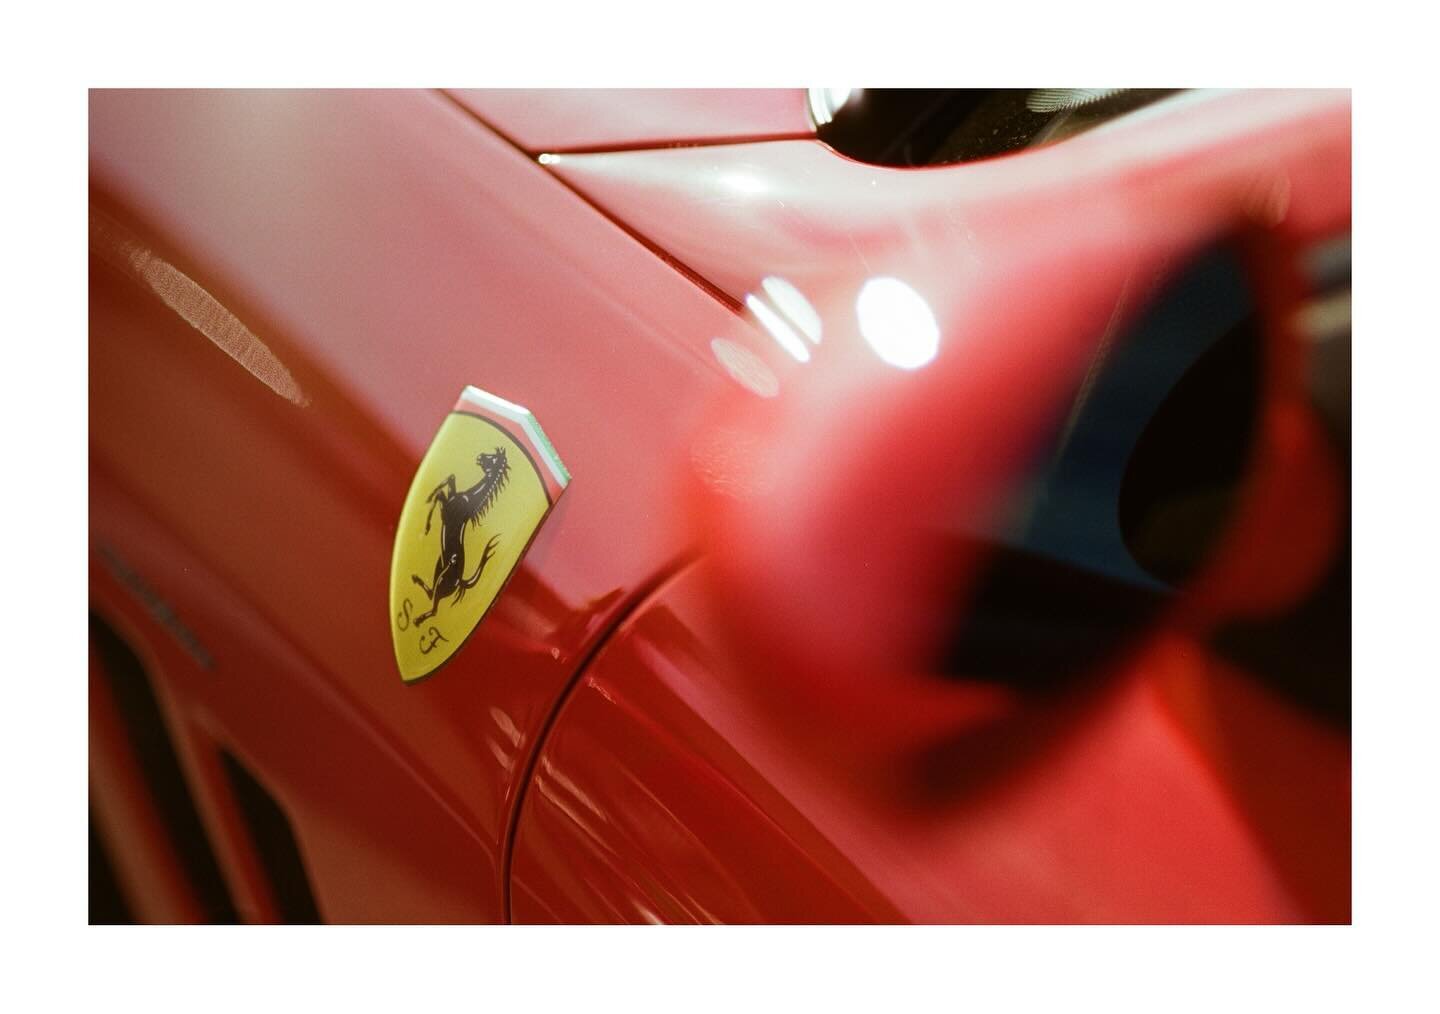 The color of desire 🏁

📸 @journal_of_josh 

@ferrariofatlanta @ferrariusa #carsof30a #30a #ferrariusa #ferrariofatlanta #ferrari #ferrarilove #happyvalentinesday